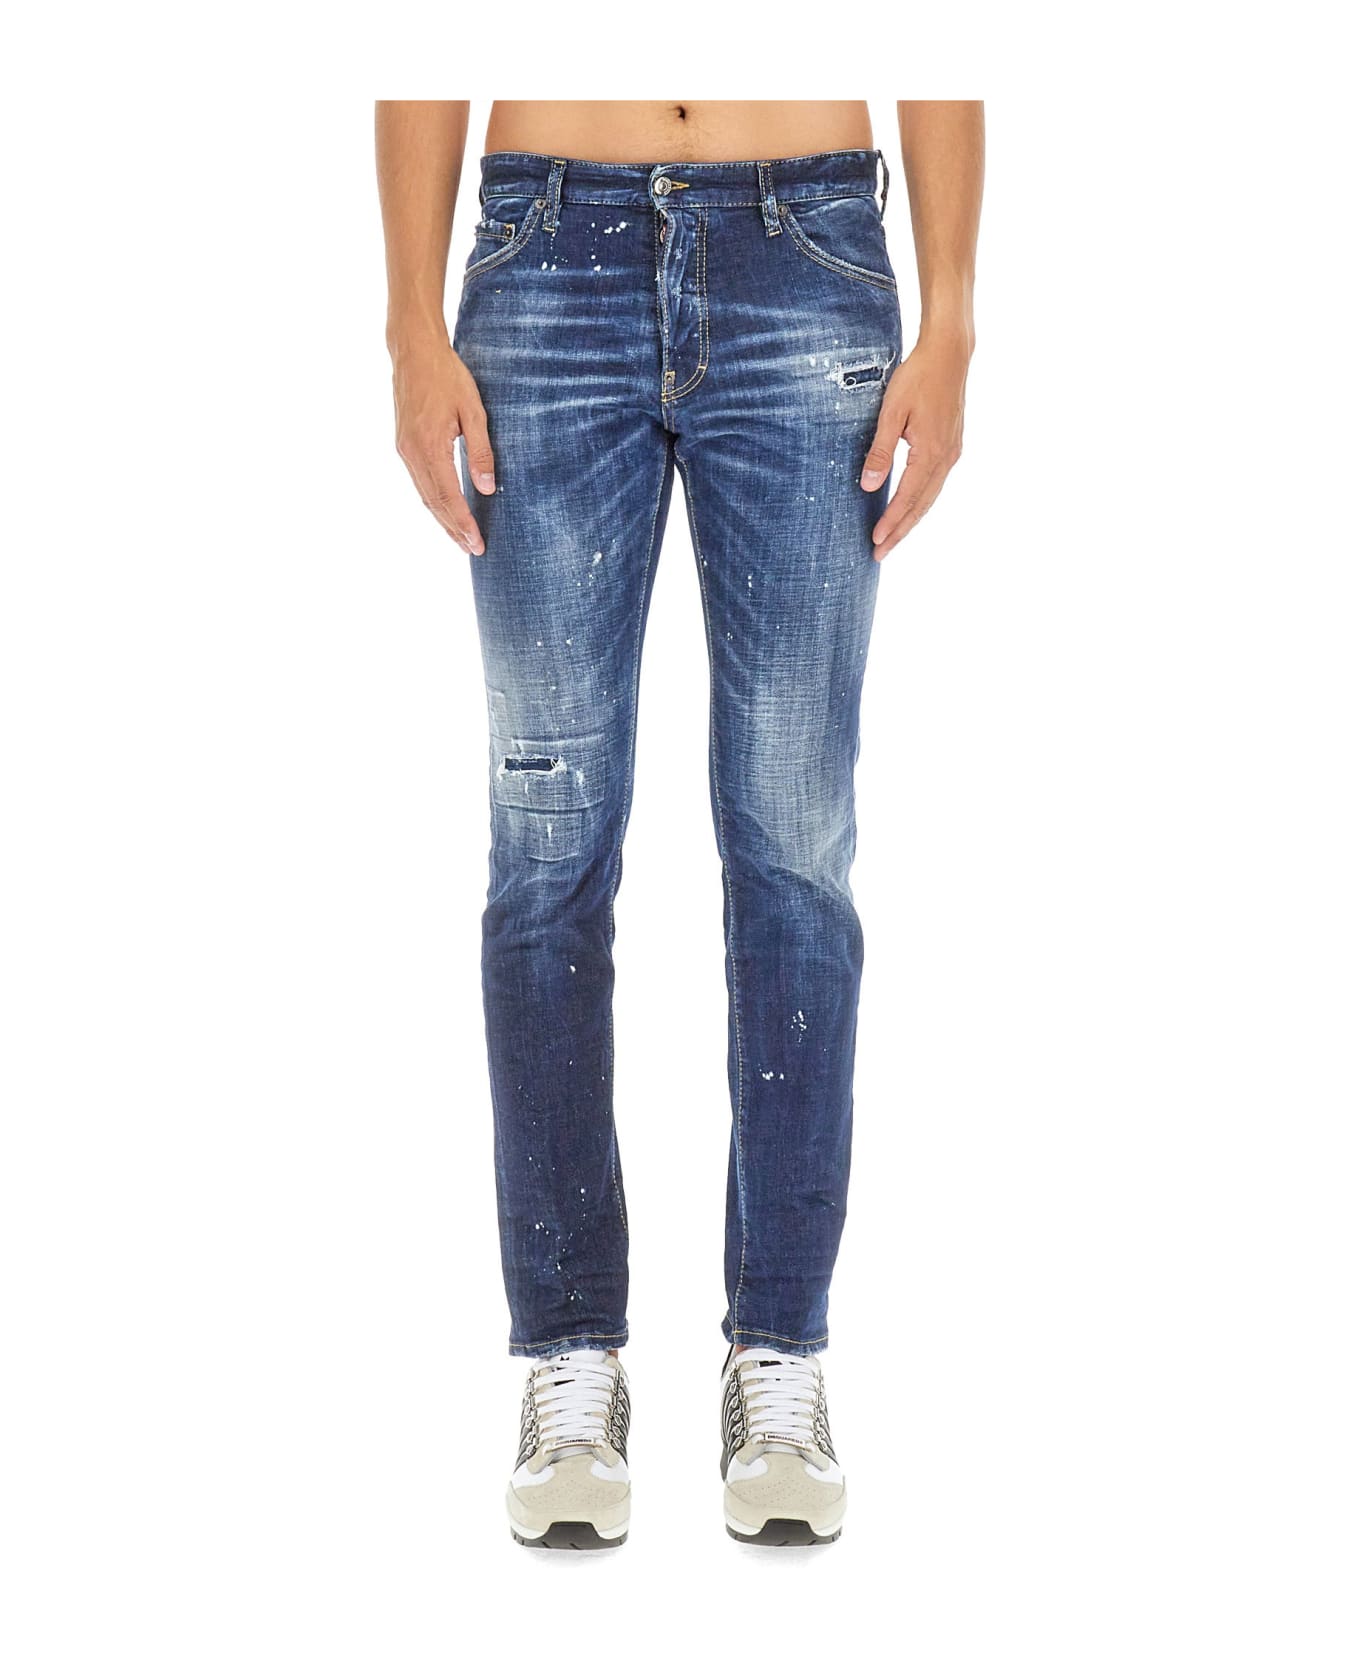 Dsquared2 "cool Guy Jean" Men's Jeans - Blue ボトムス